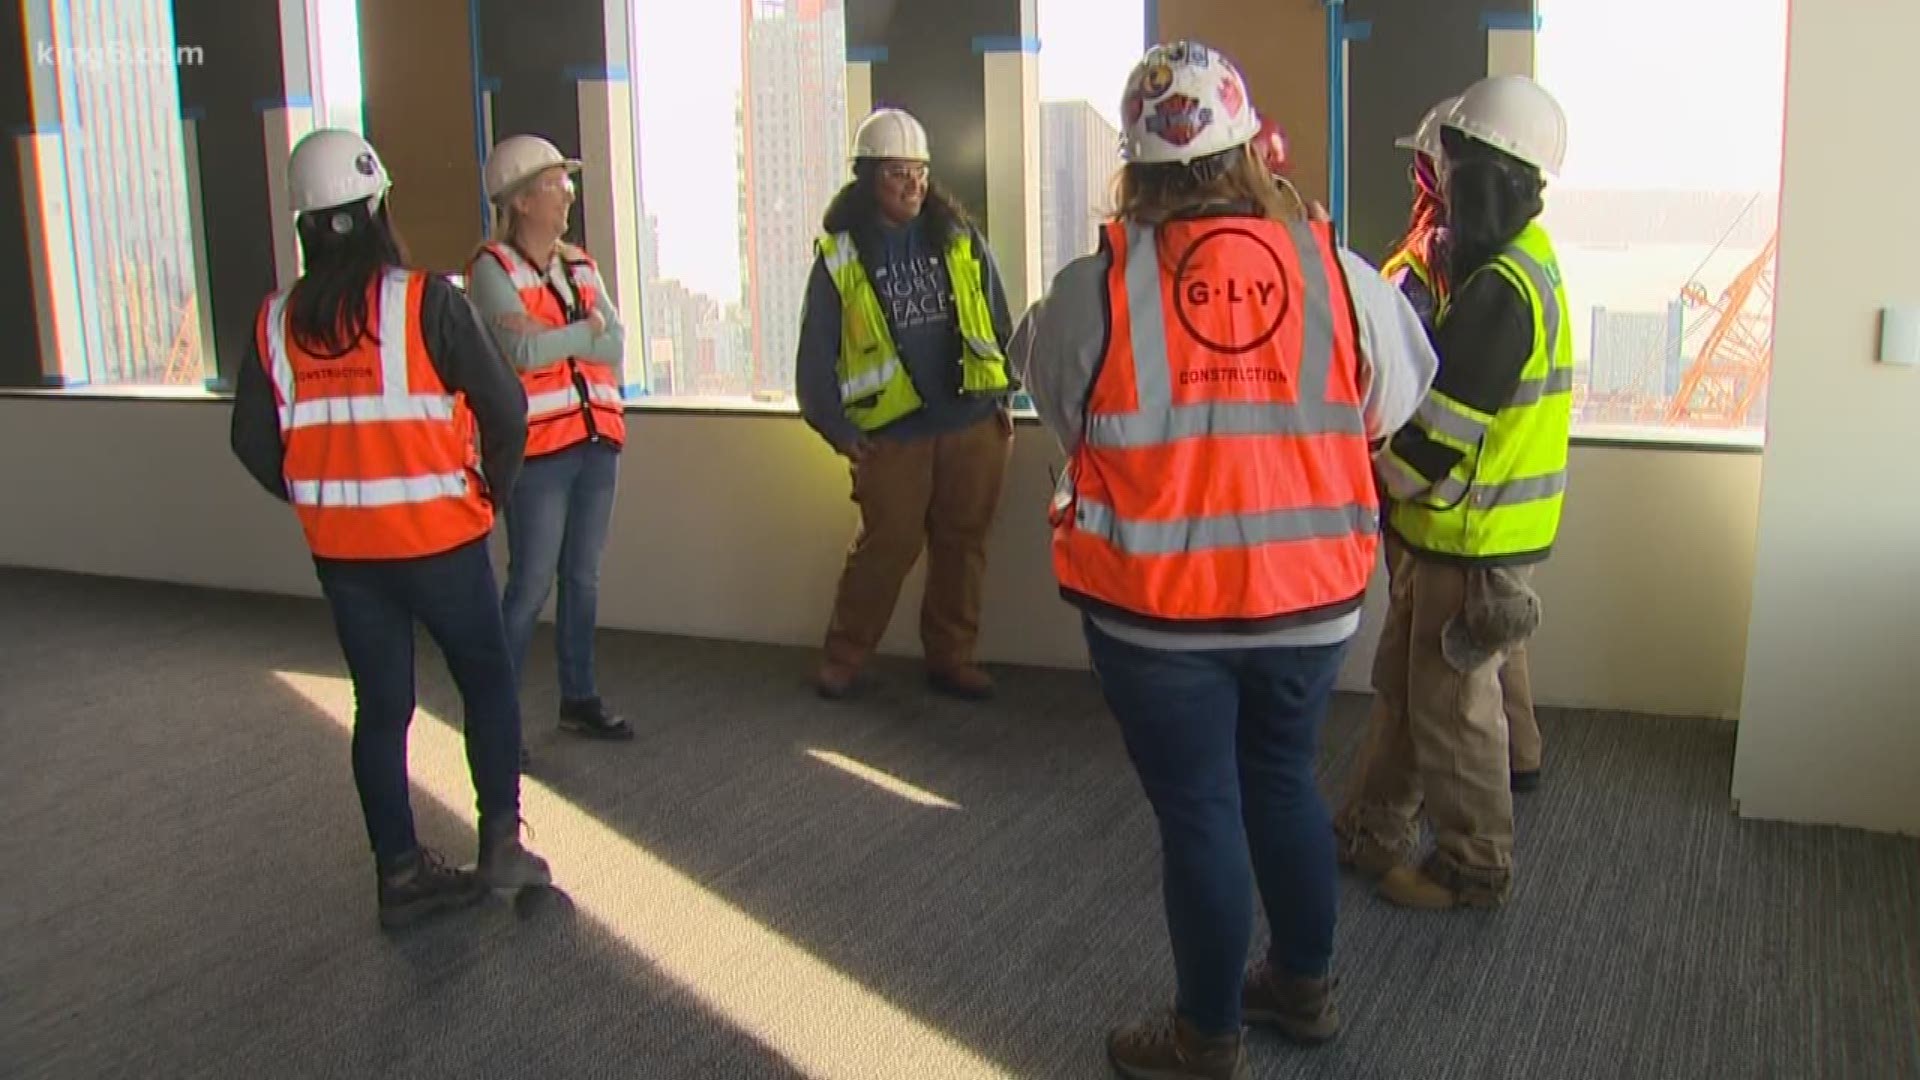 23 women will be graduating from a program that offers training in construction trades.